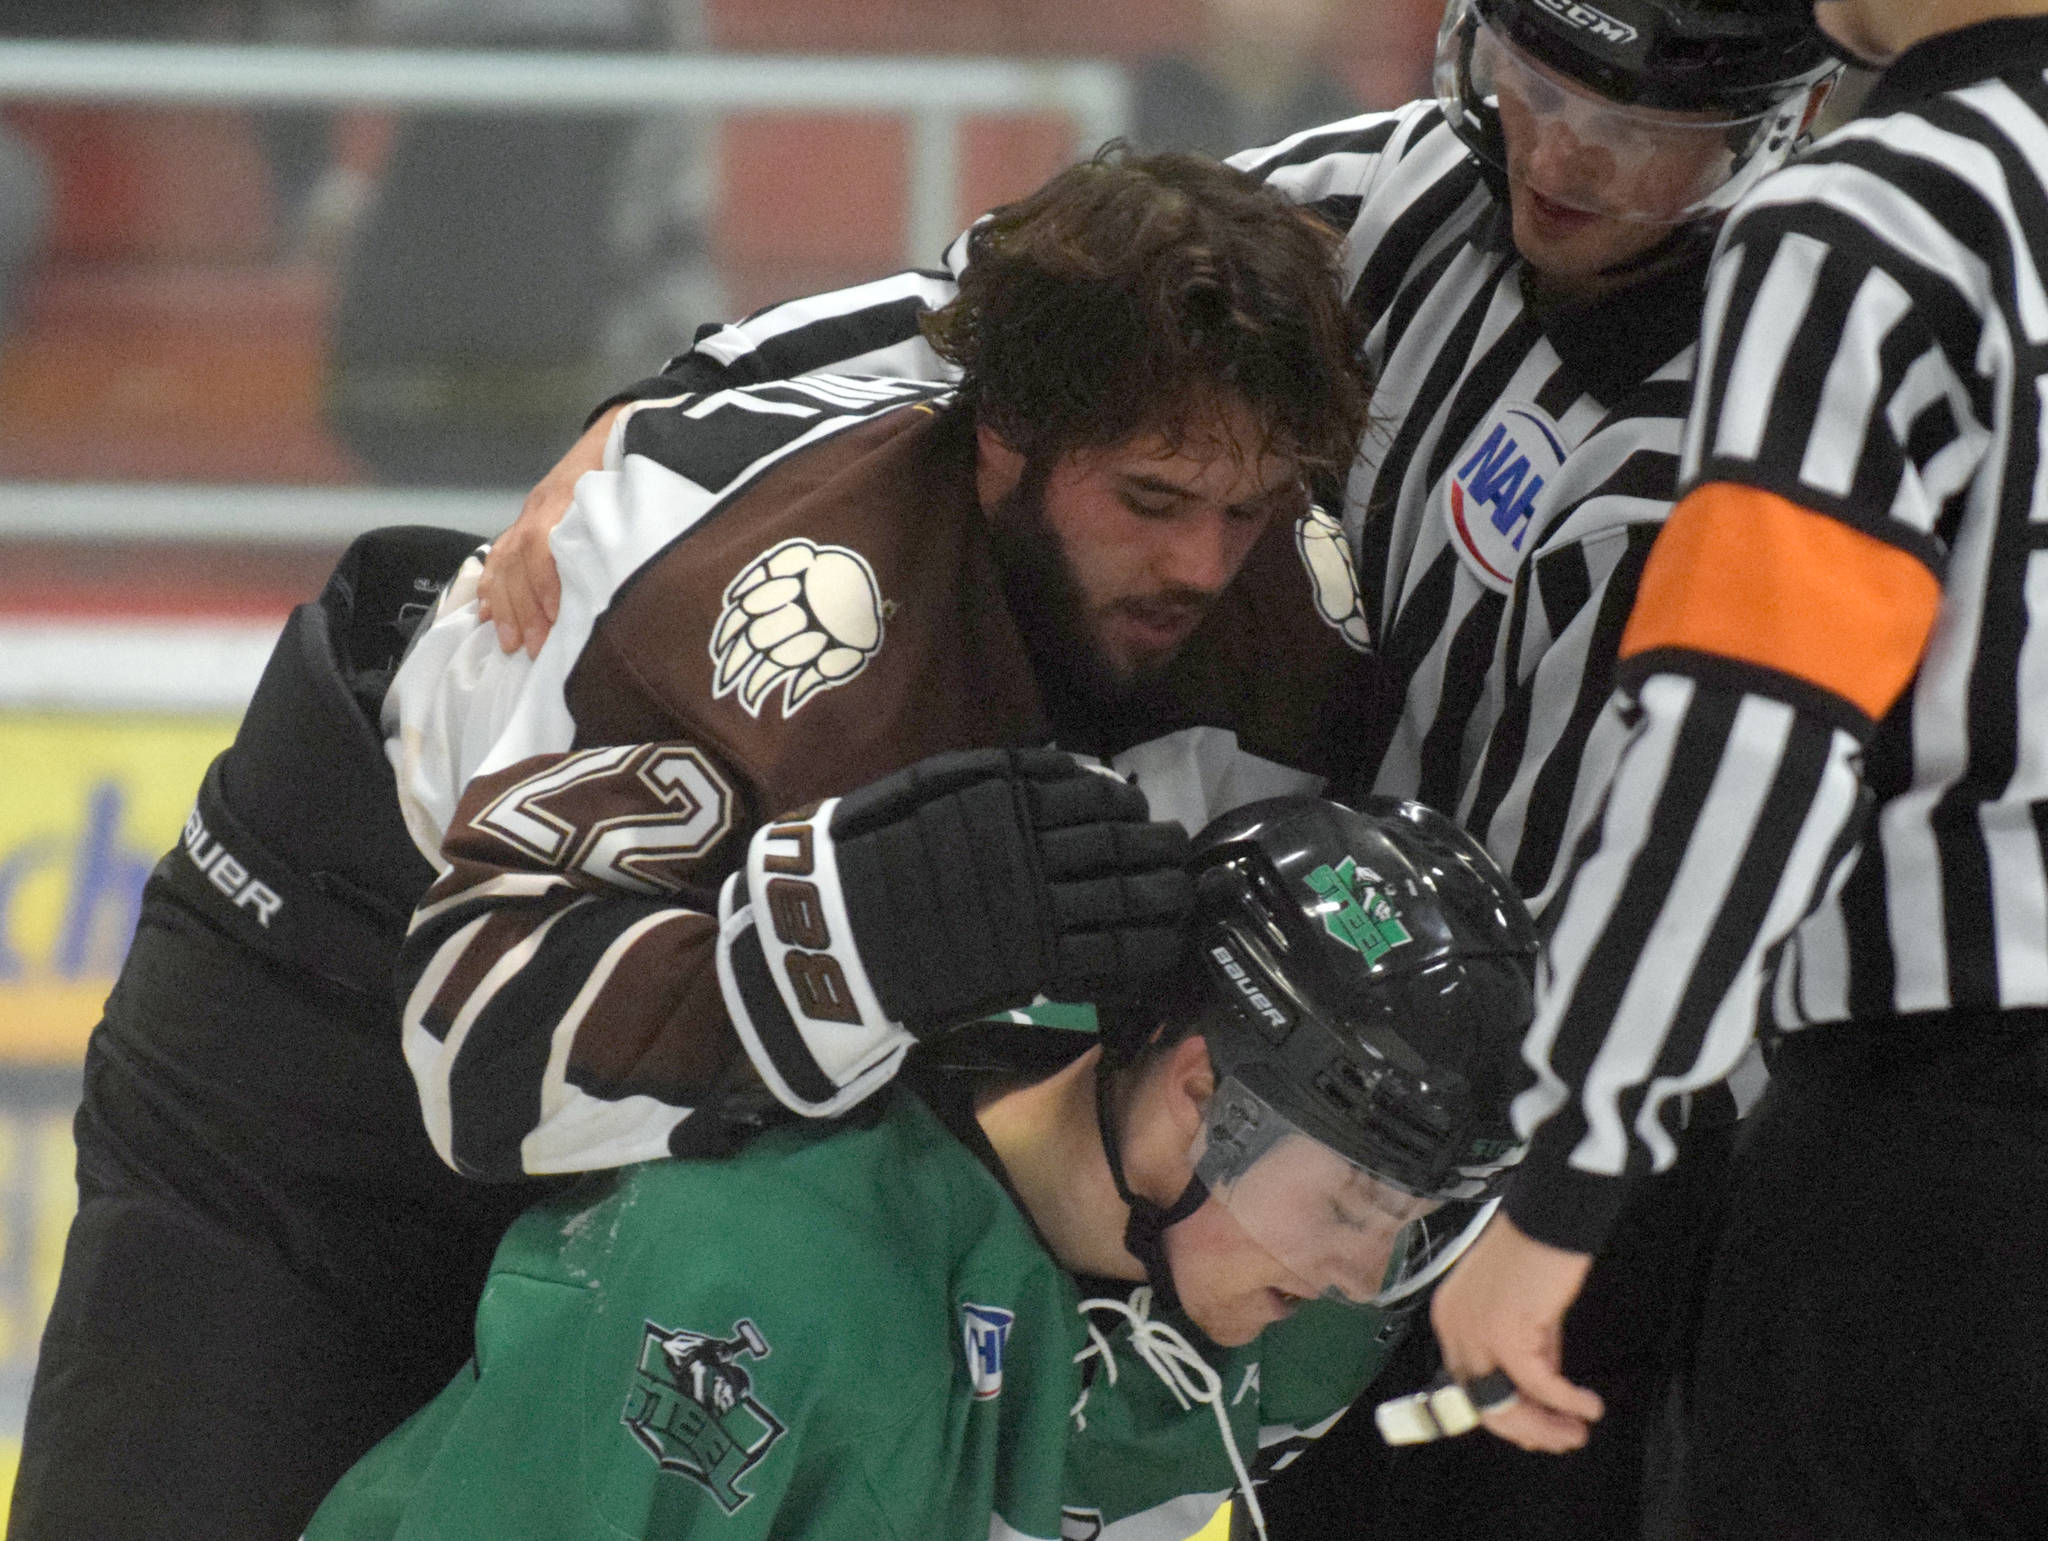 Kenai River Brown Bears defenseman Connor Scahill is involved in a brief scuffle with Jordan Gonzalez of the Chippewa (Wisconsin) Steel on Oct. 5, 2018, at the Soldotna Regional Sports Complex. (Photo by Jeff Helminiak/Peninsula Clarion)